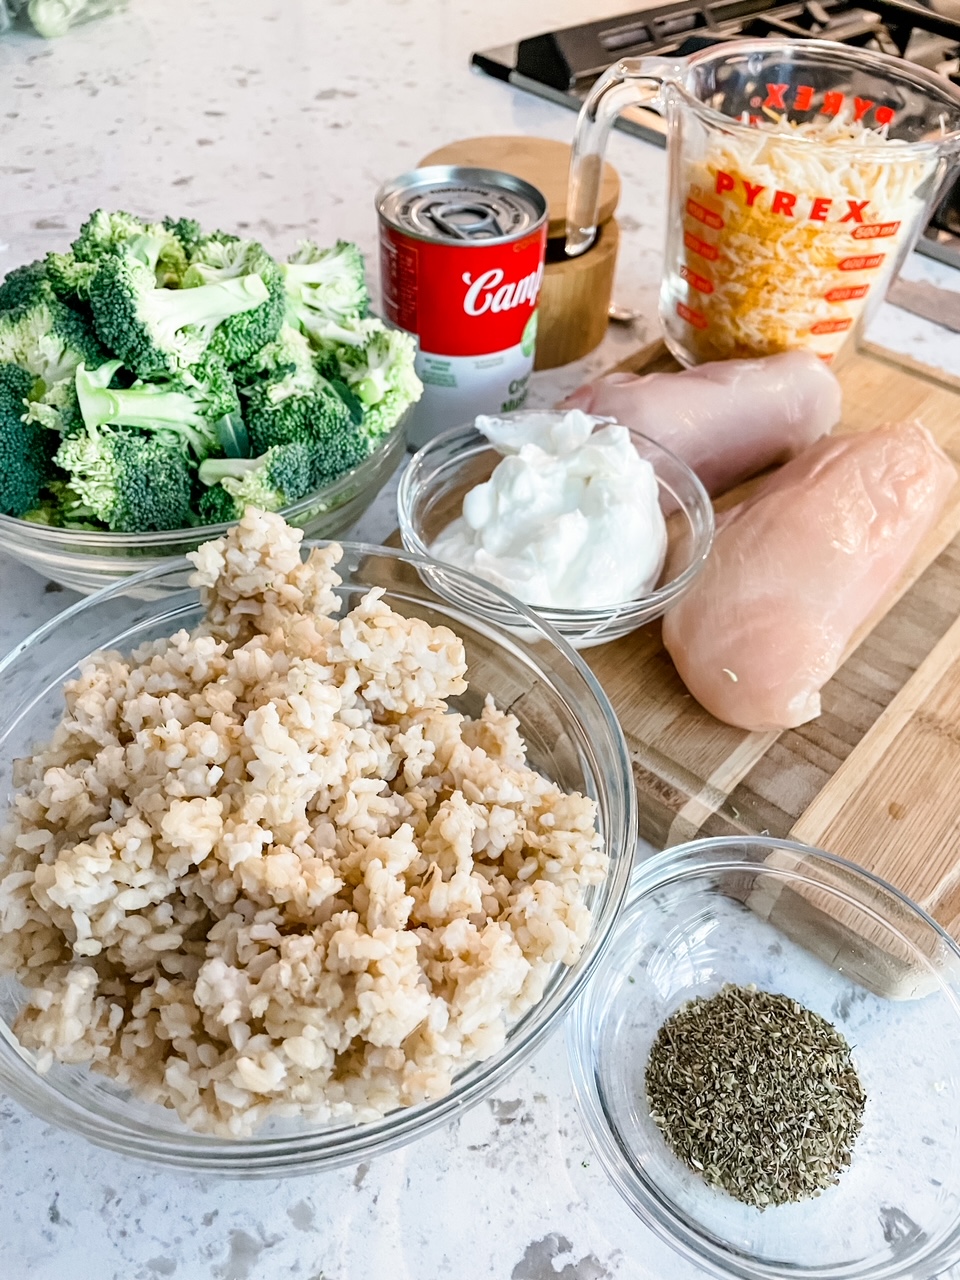 The ingredients - broccoli, chicken, rice, spices, and soup